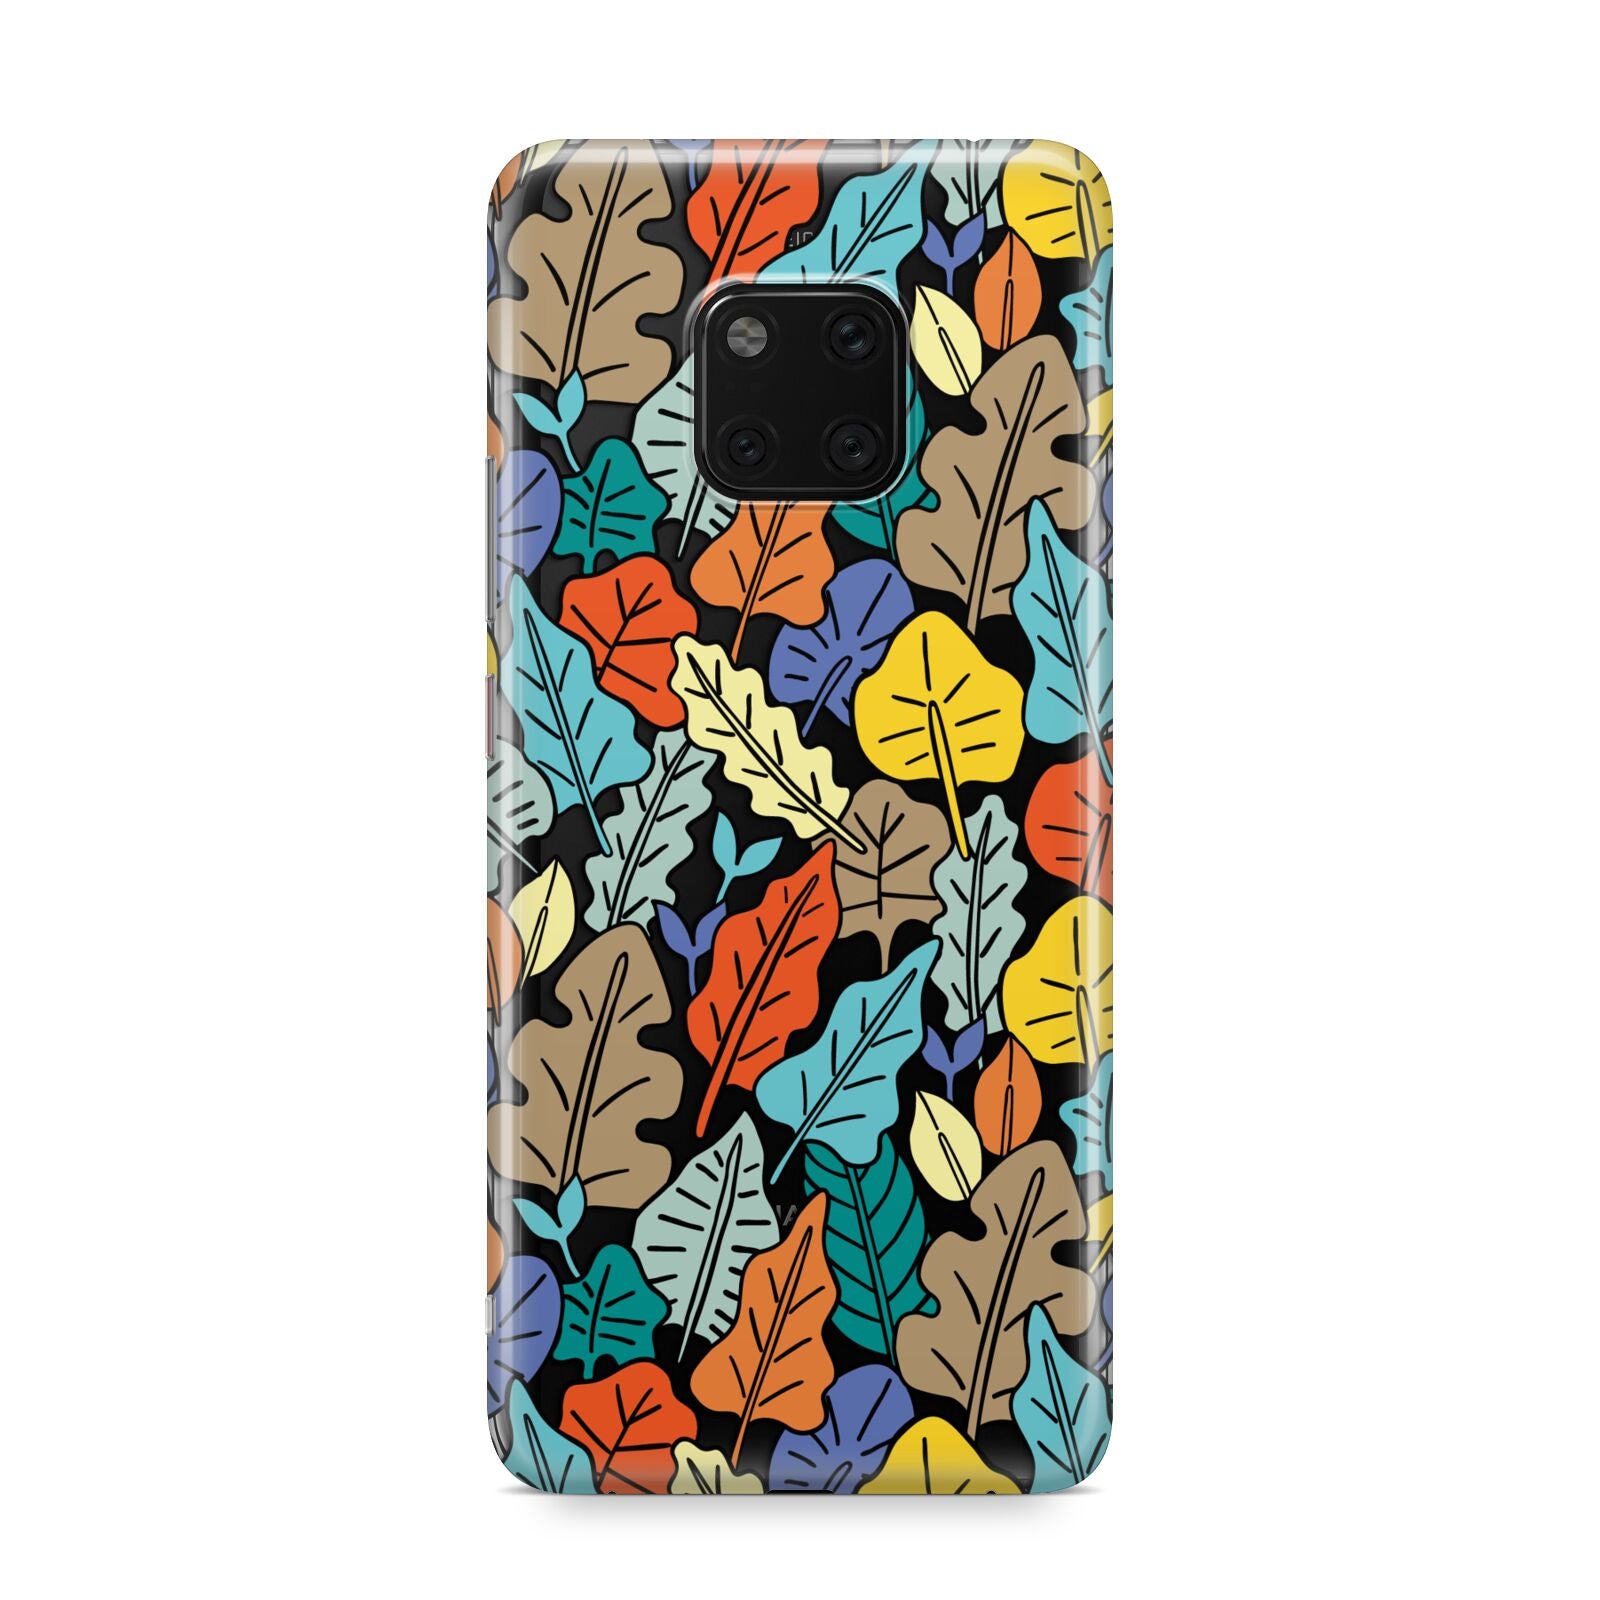 Autumn Leaves Huawei Mate 20 Pro Phone Case